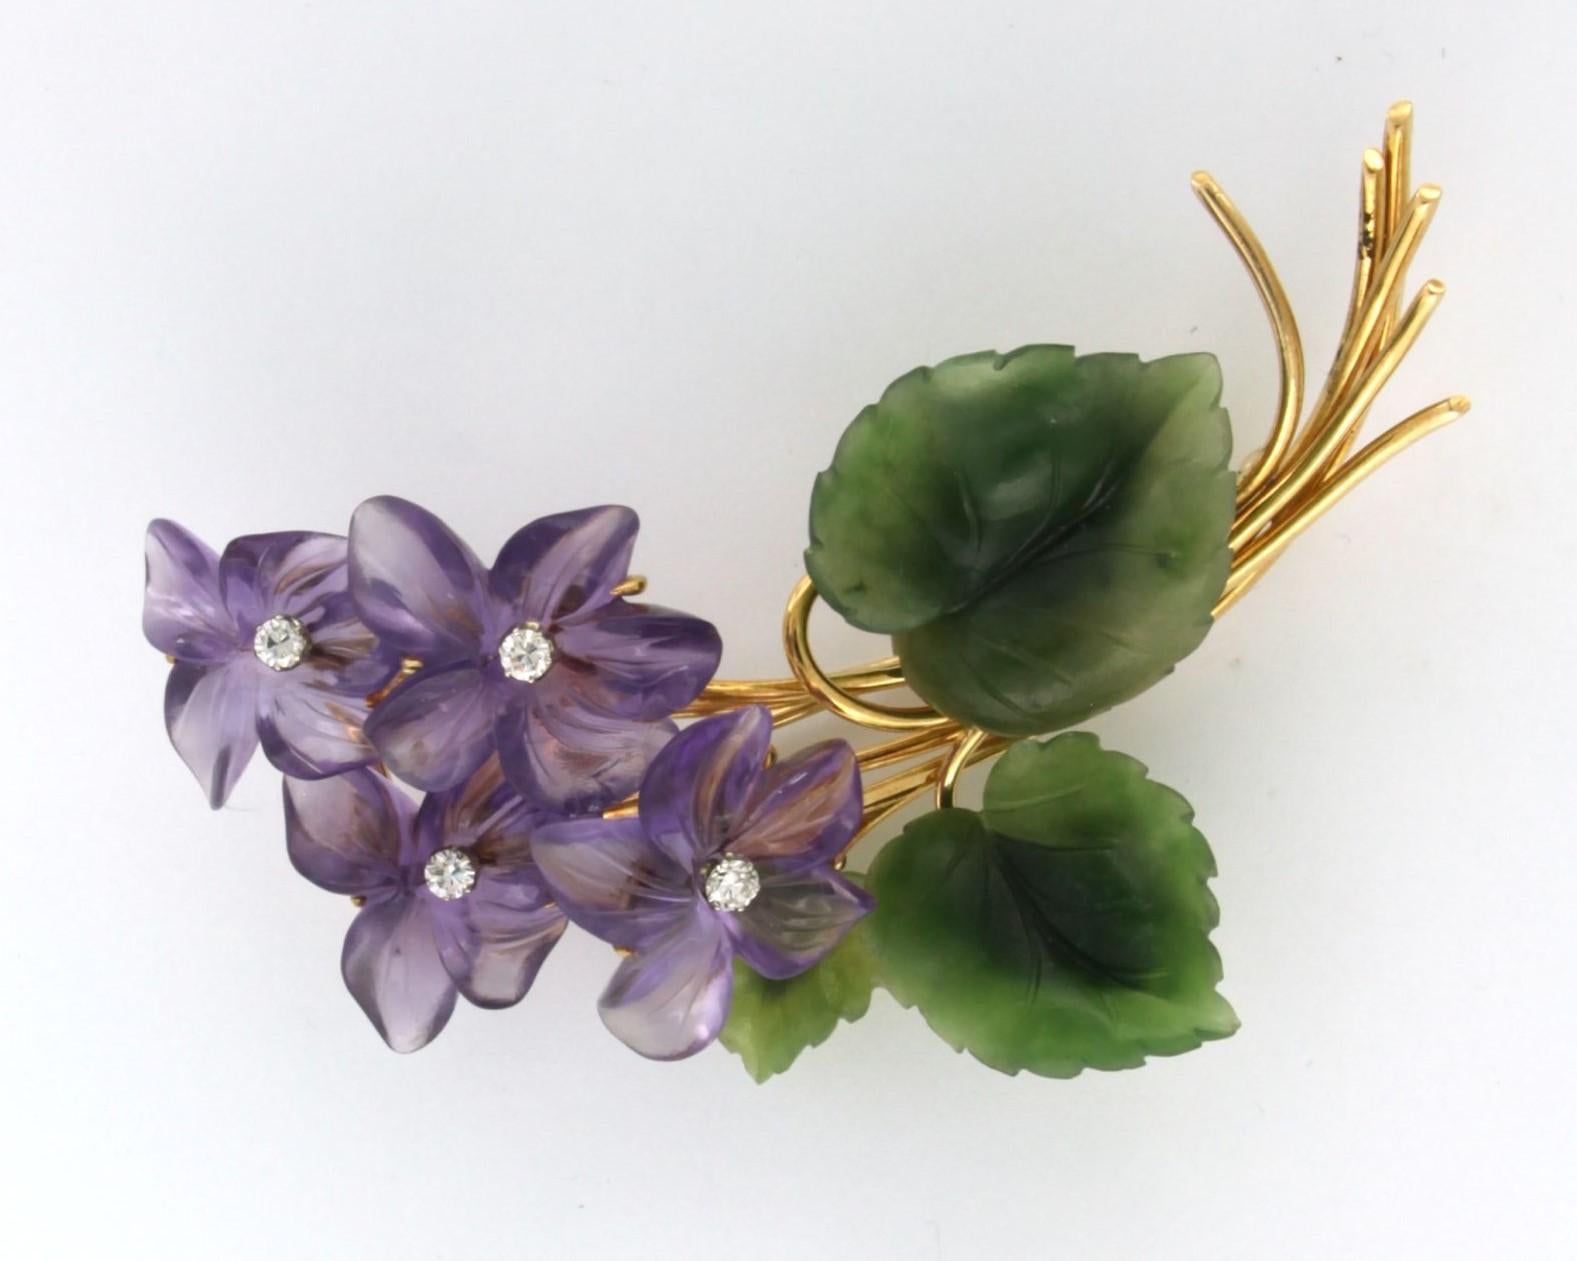 18 carat bicolor gold brooch in the shape of a bunch of flowers, set with amethyst flowers, jade leaves and brilliant cut diamonds, 0.20ct in total - F/G - VS/SI

detailed description:

The size of the brooch is 6.5 cm long by 5.0 cm wide

weight: